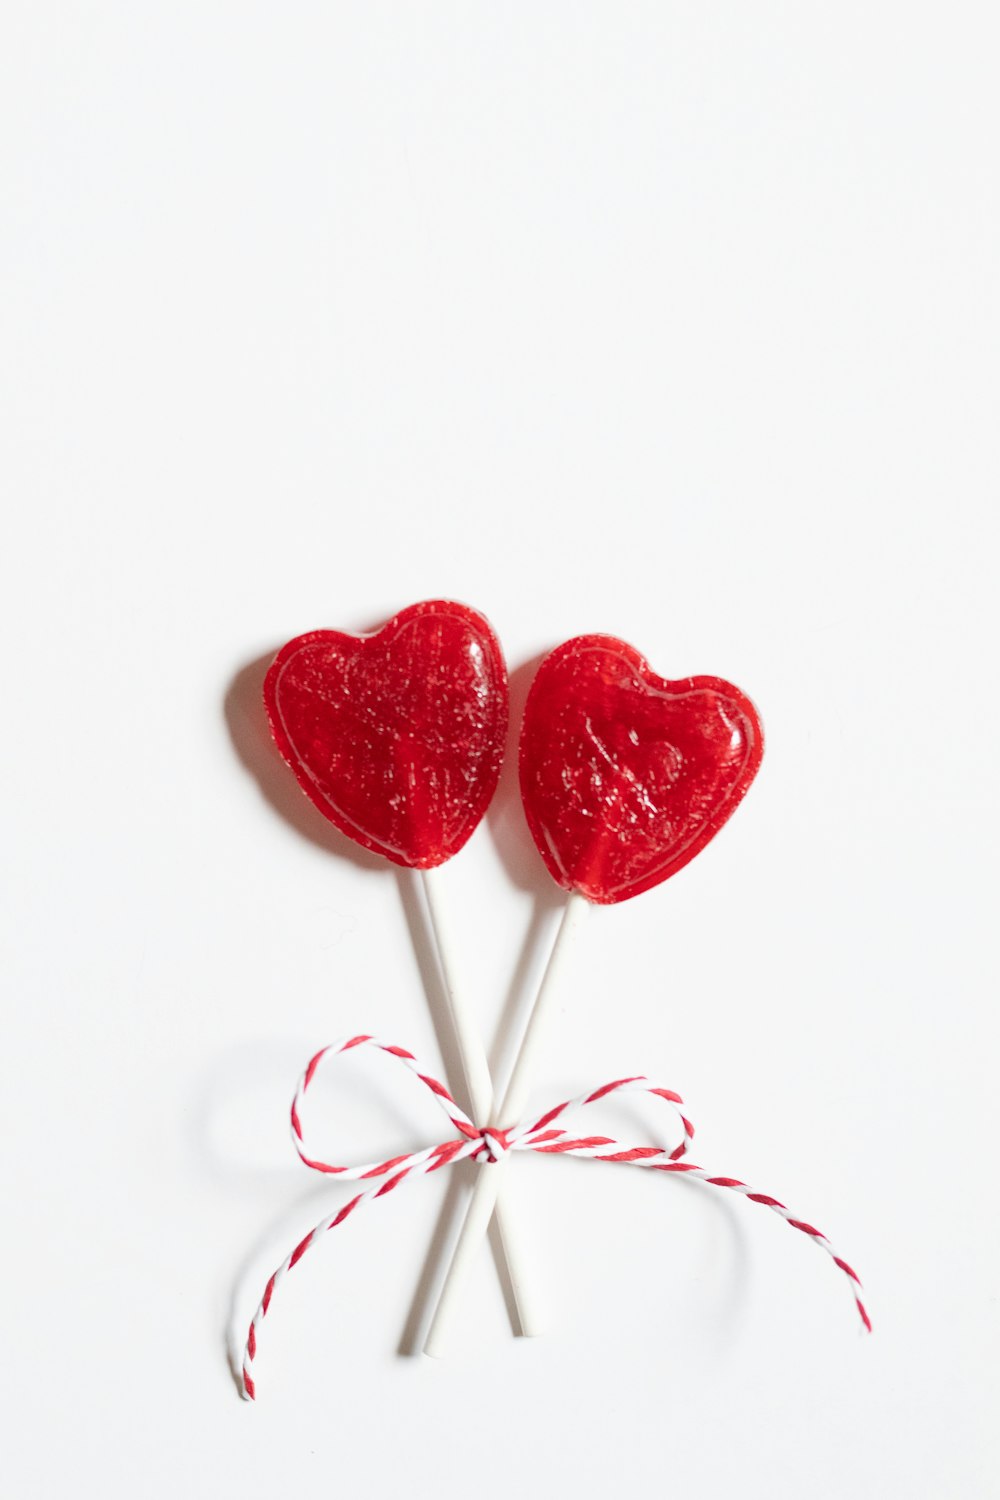 two heart shaped lollipops tied up on a white surface